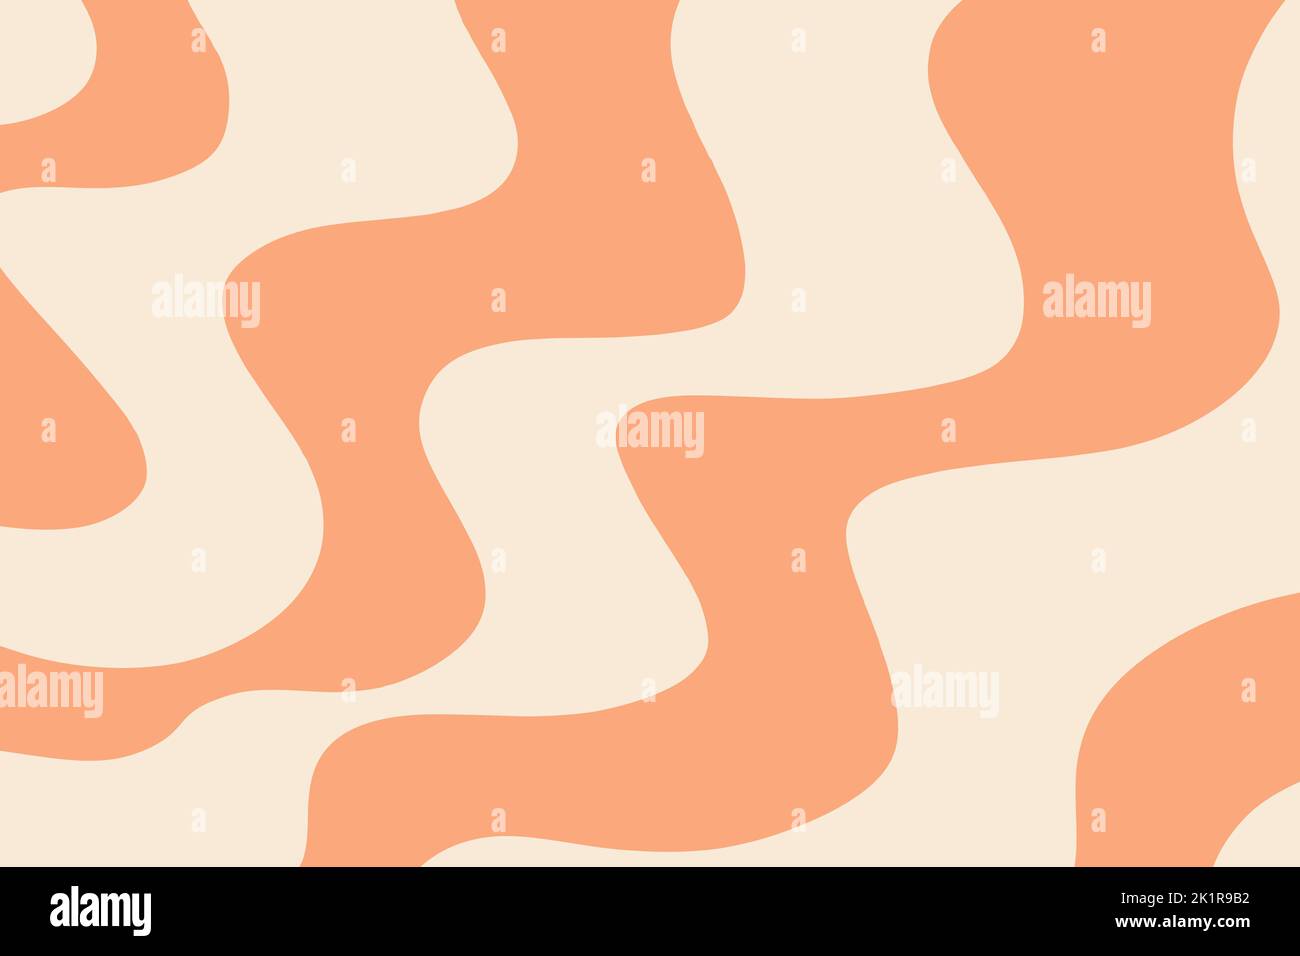 Retro 70s Abstract curve background vector illustration Stock Vector